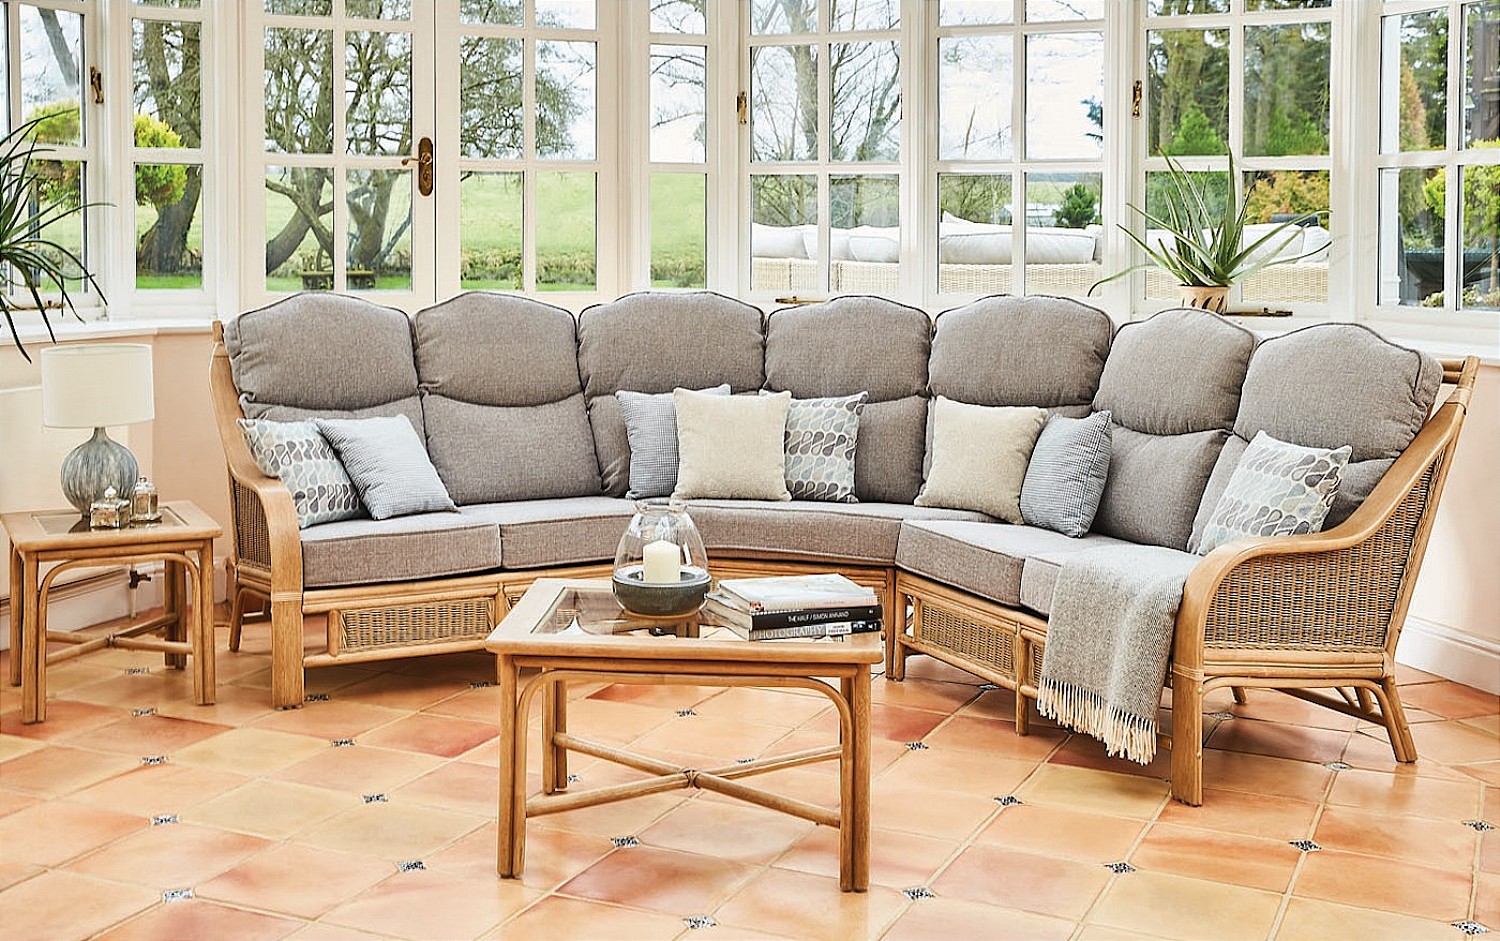 Why Conservatory Furnishings Are Becoming More Popular